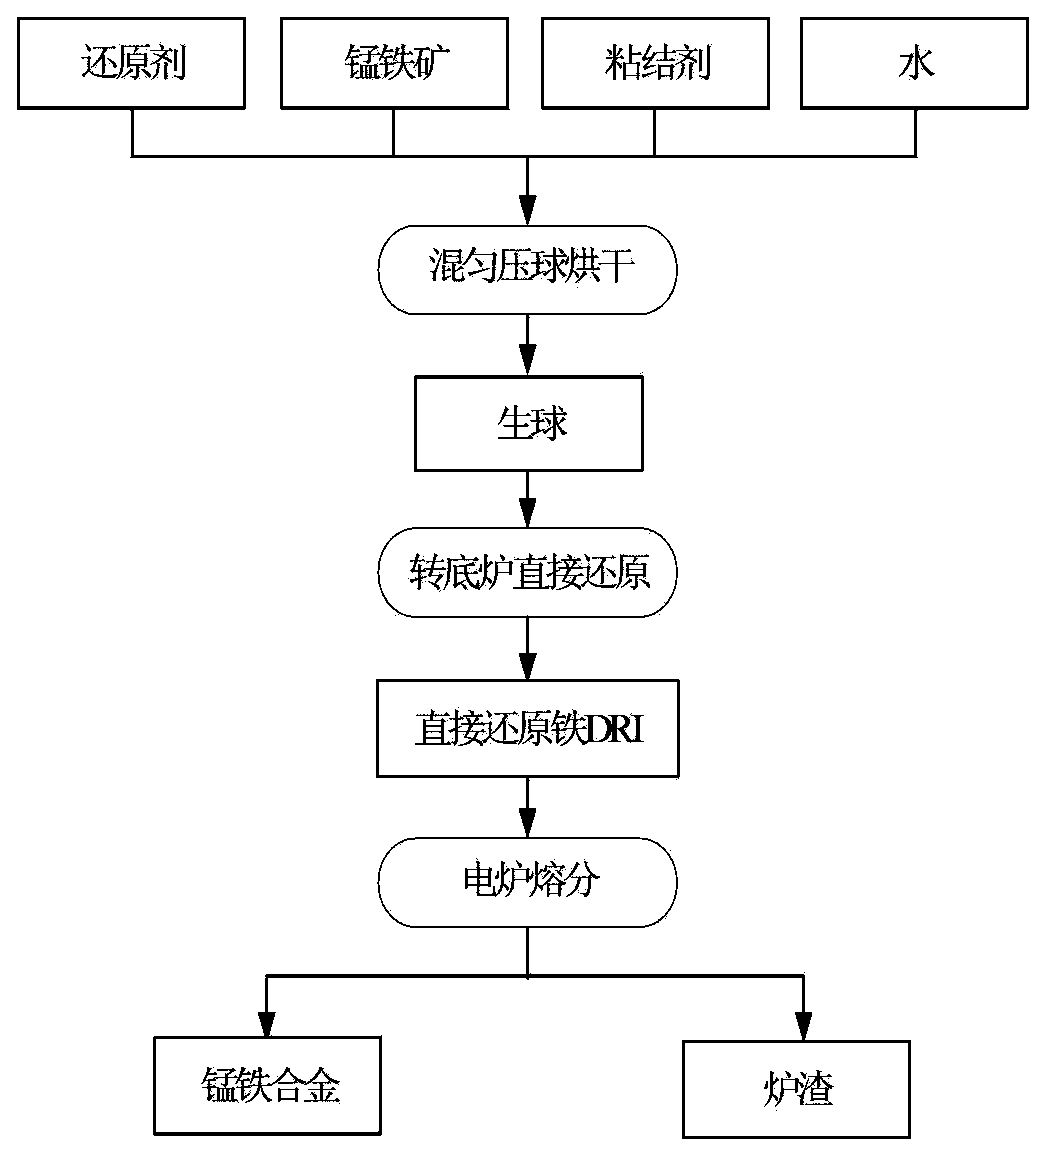 Method for treating lean ferrous manganese ore by directly reducing electric furnace melting components through rotary hearth furnace